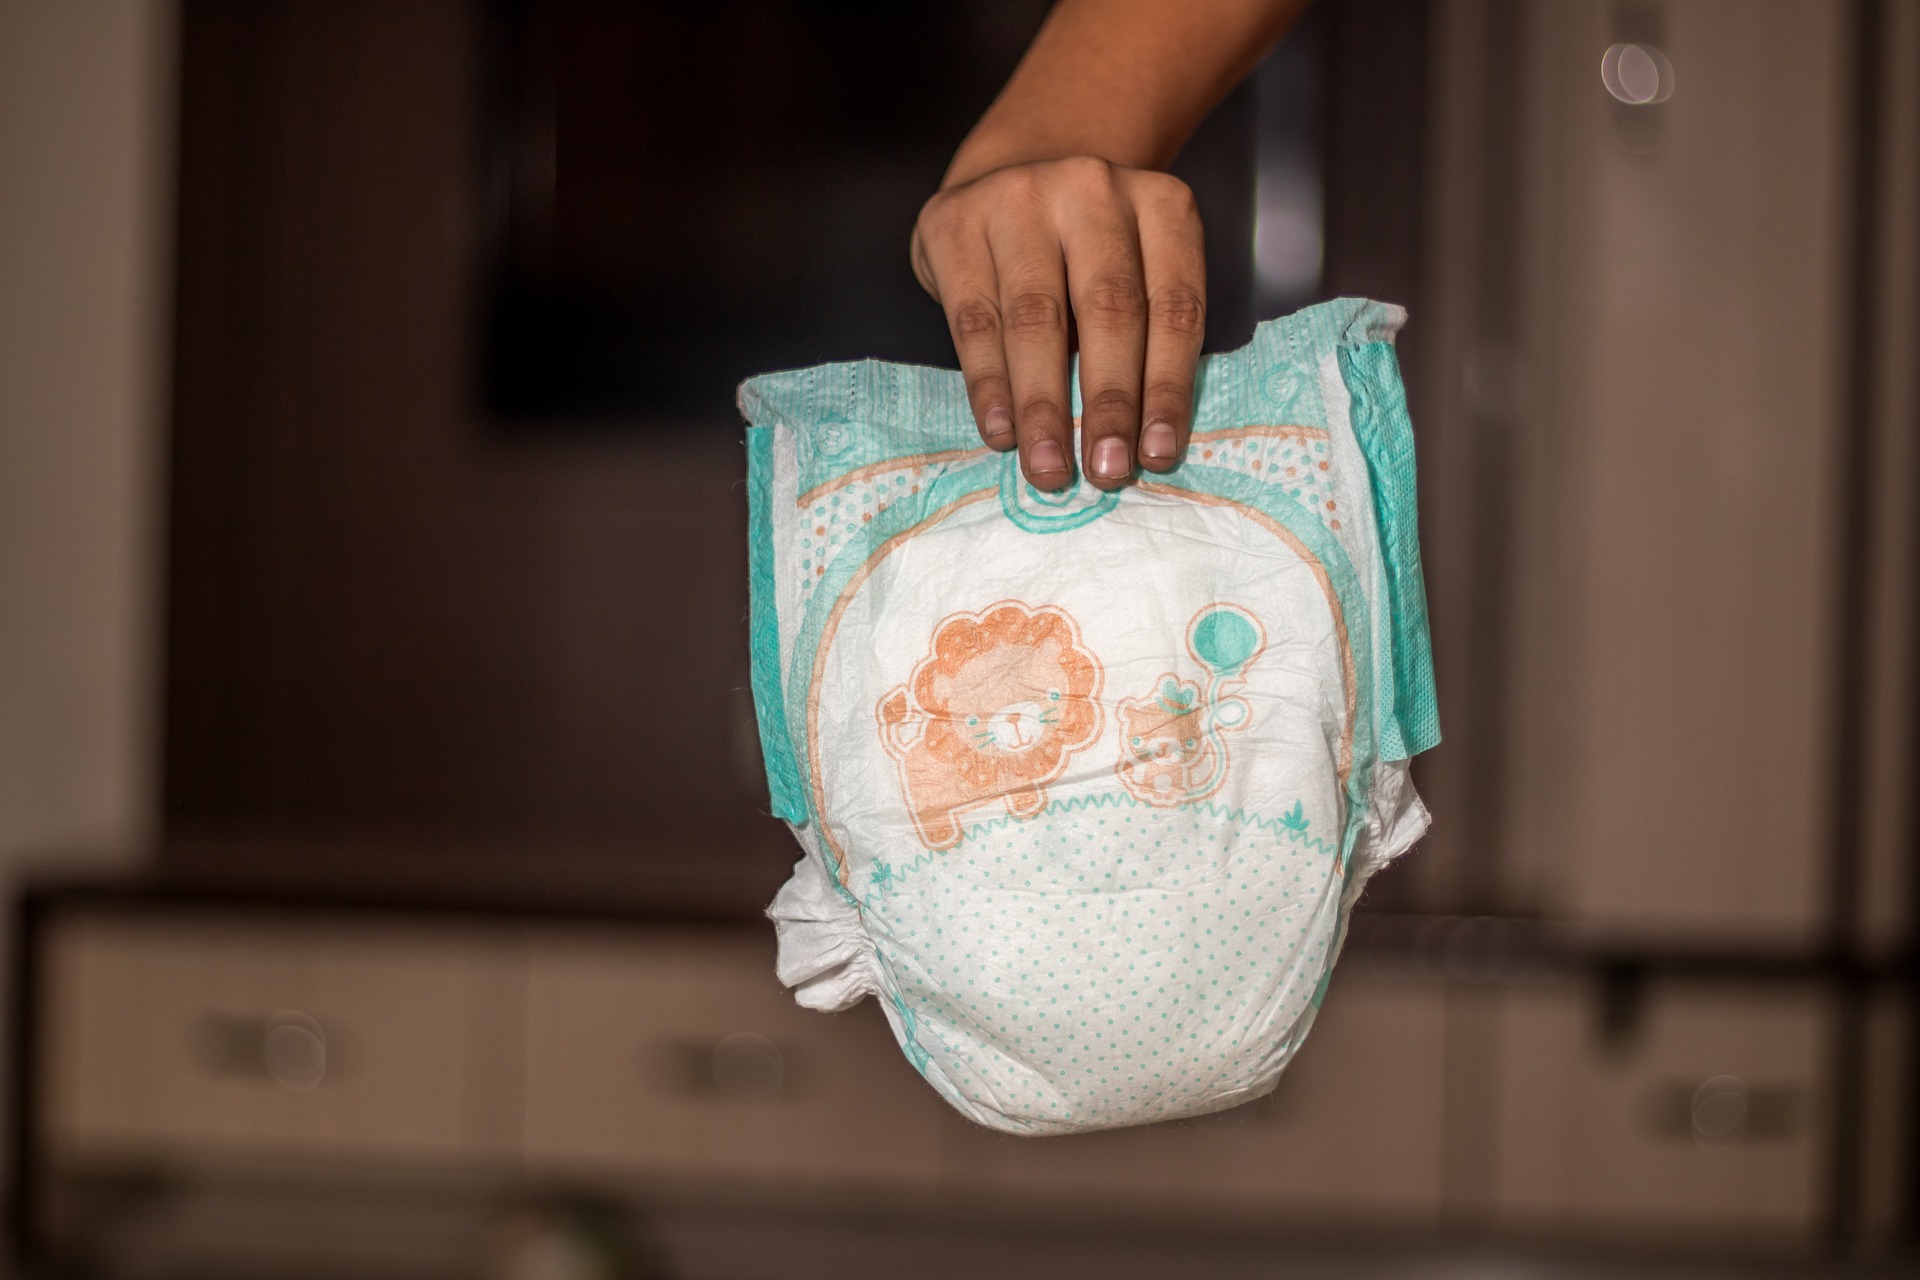 Growing potential for chemically recycling diapers